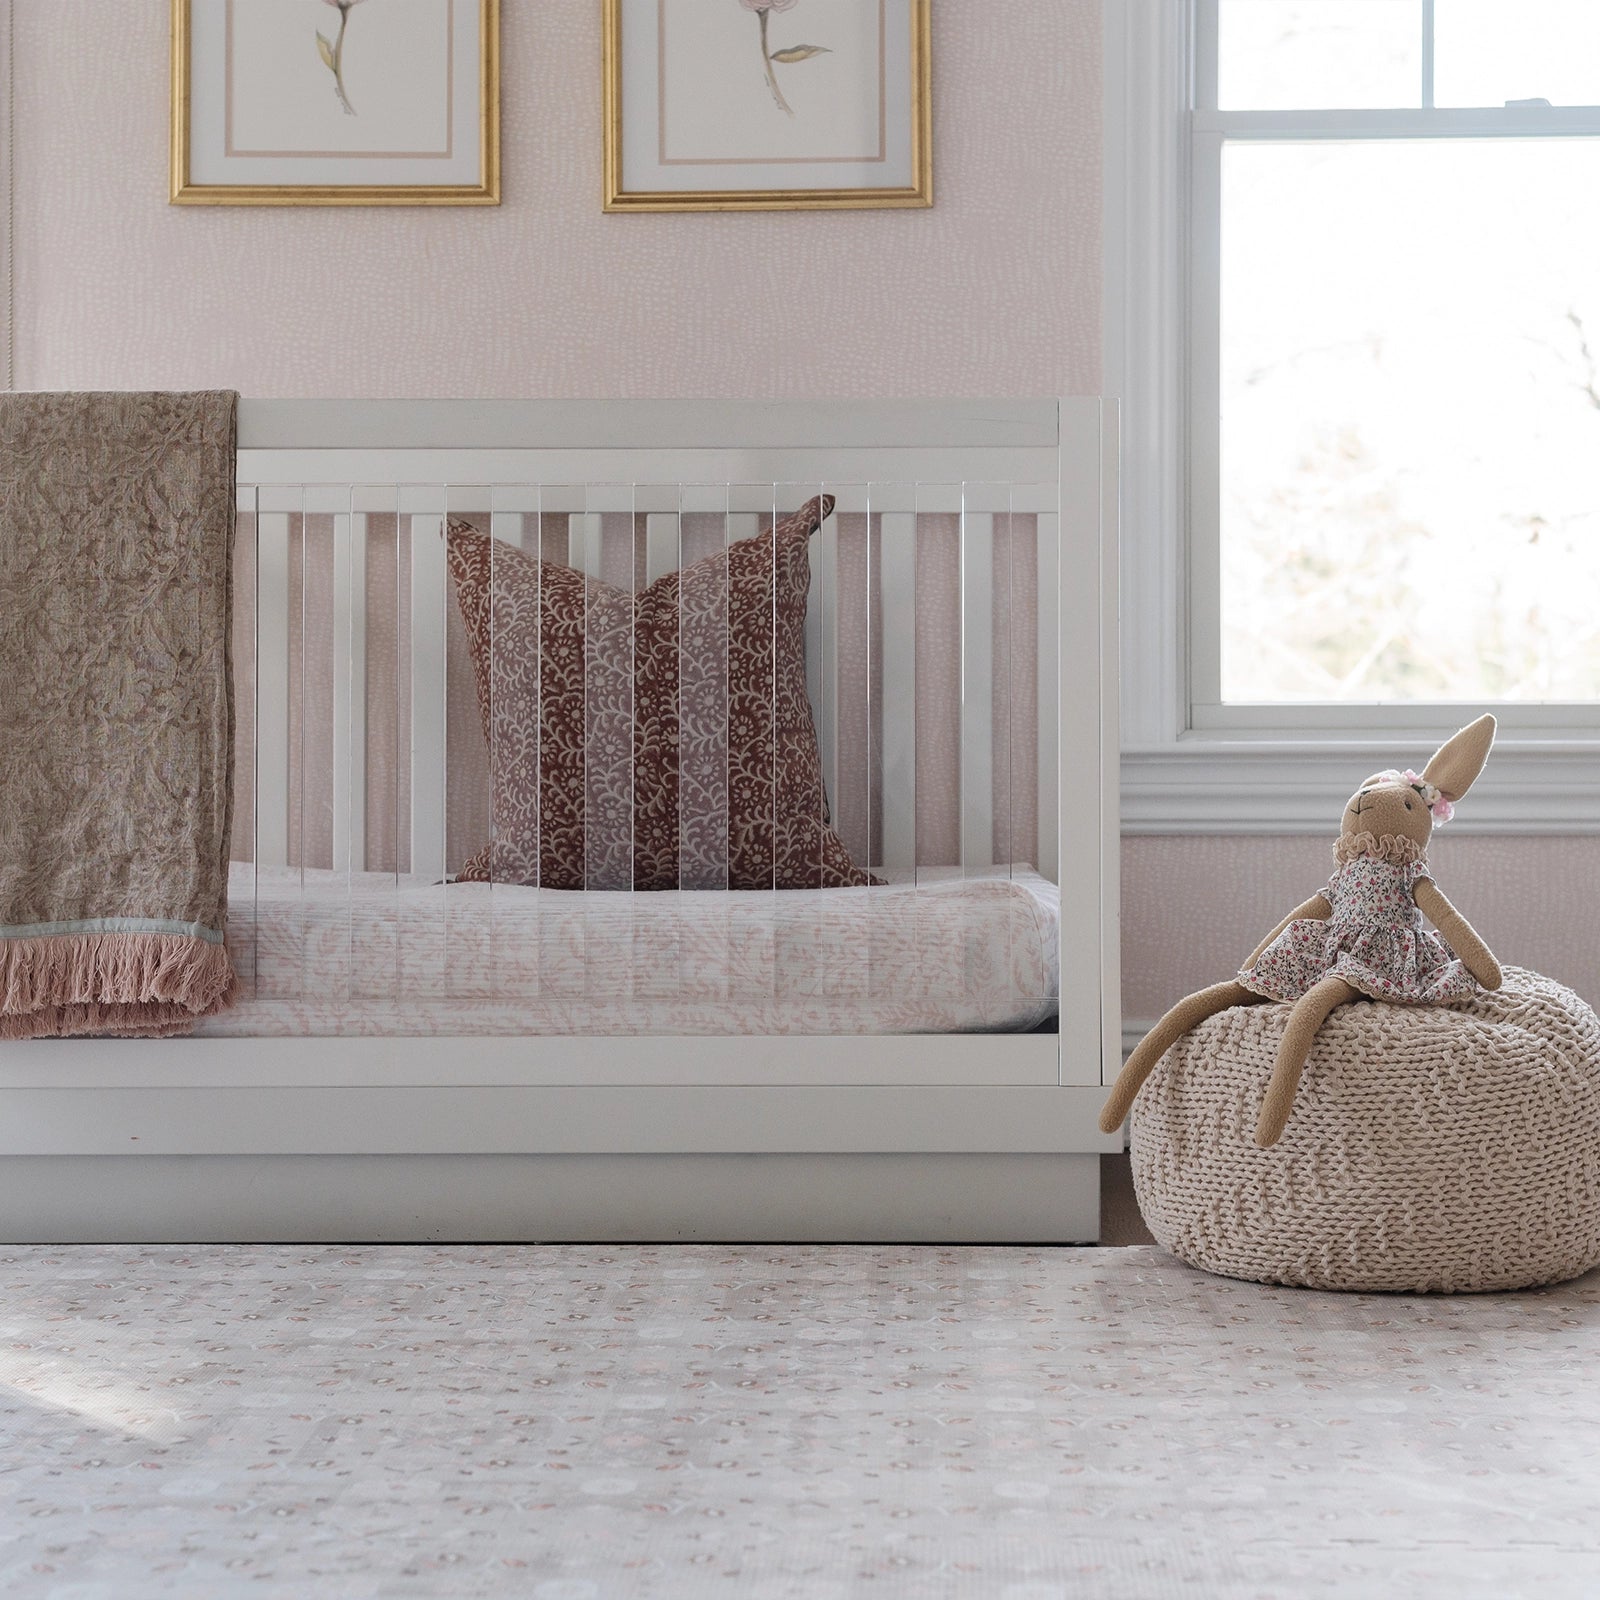 Linen beige and light pink floral baby play mat in nursery with crib and bunny stuffed animal